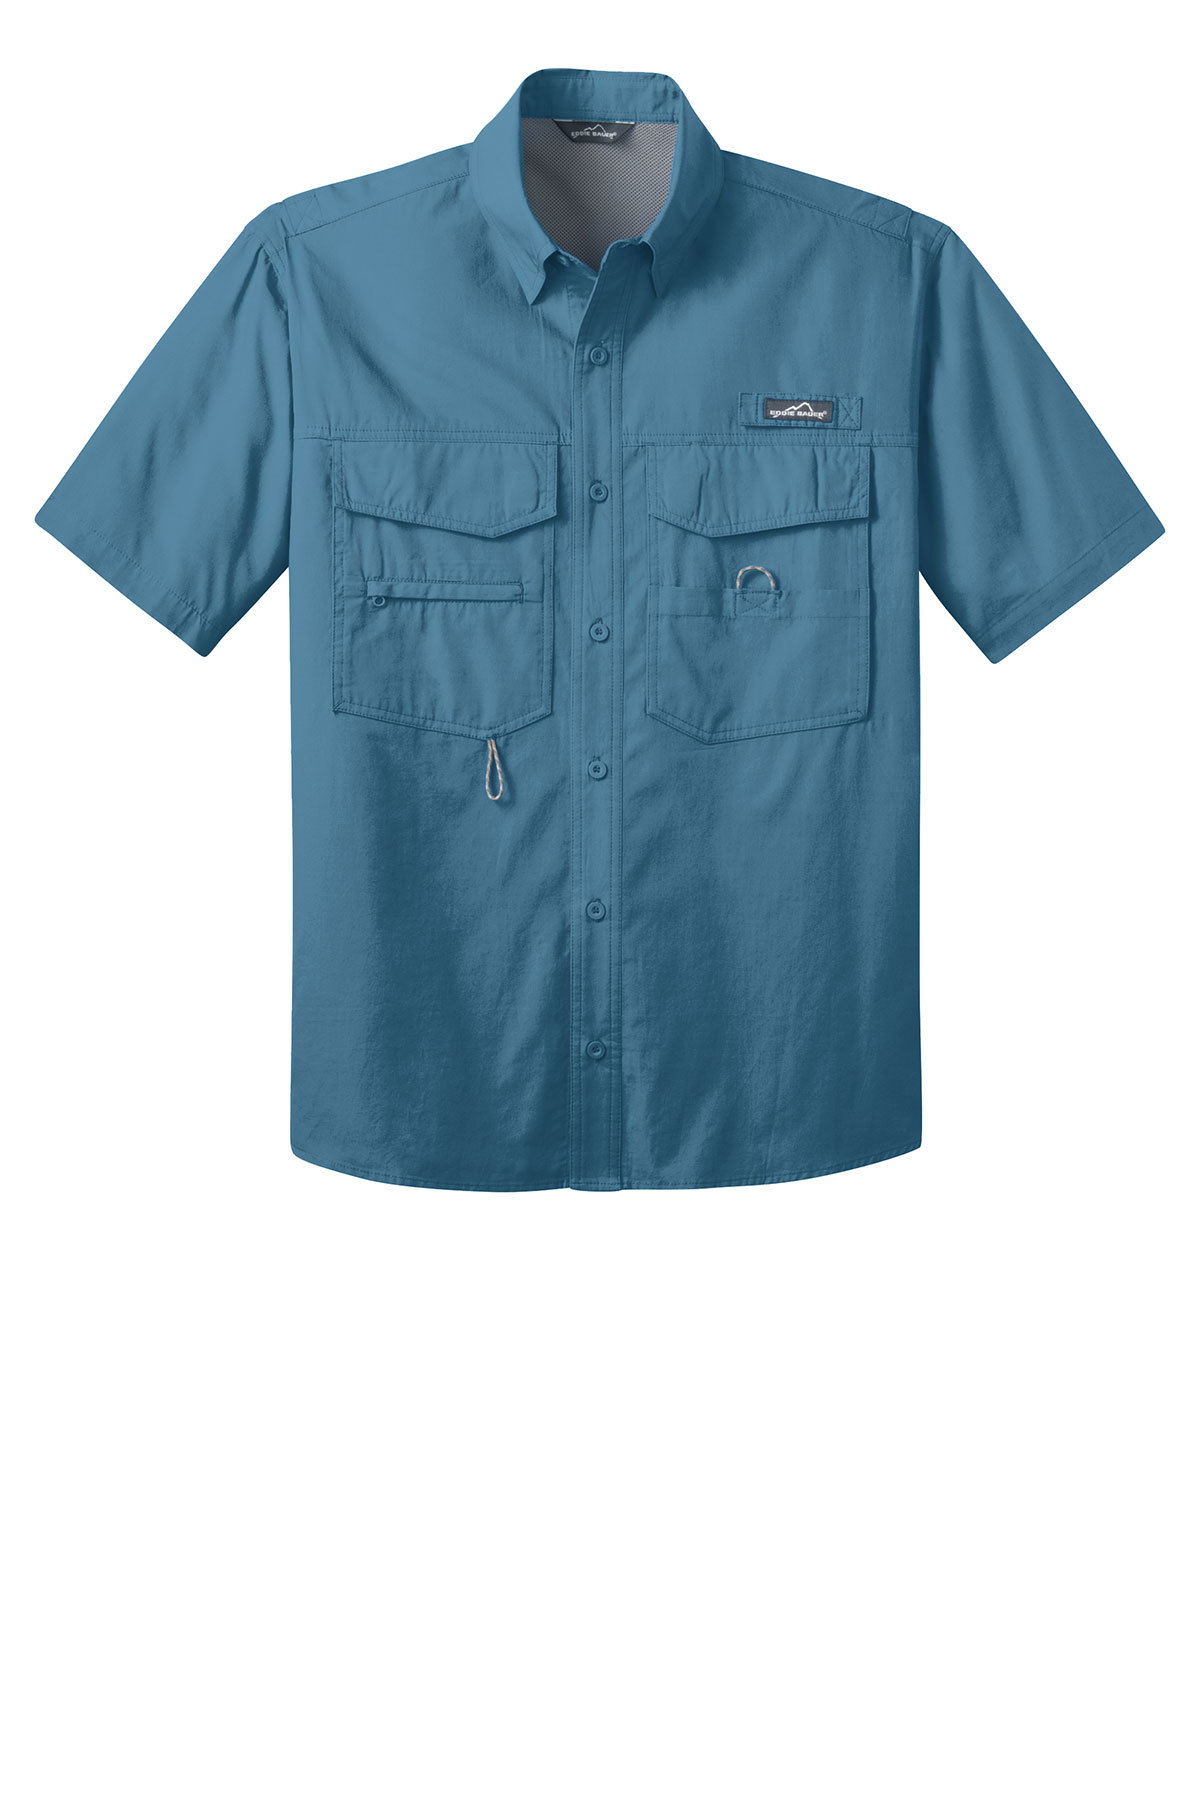 Eddie Bauer® - Long Sleeve Fishing Shirt. EB606. – Threads Embroidery for  Sunnen